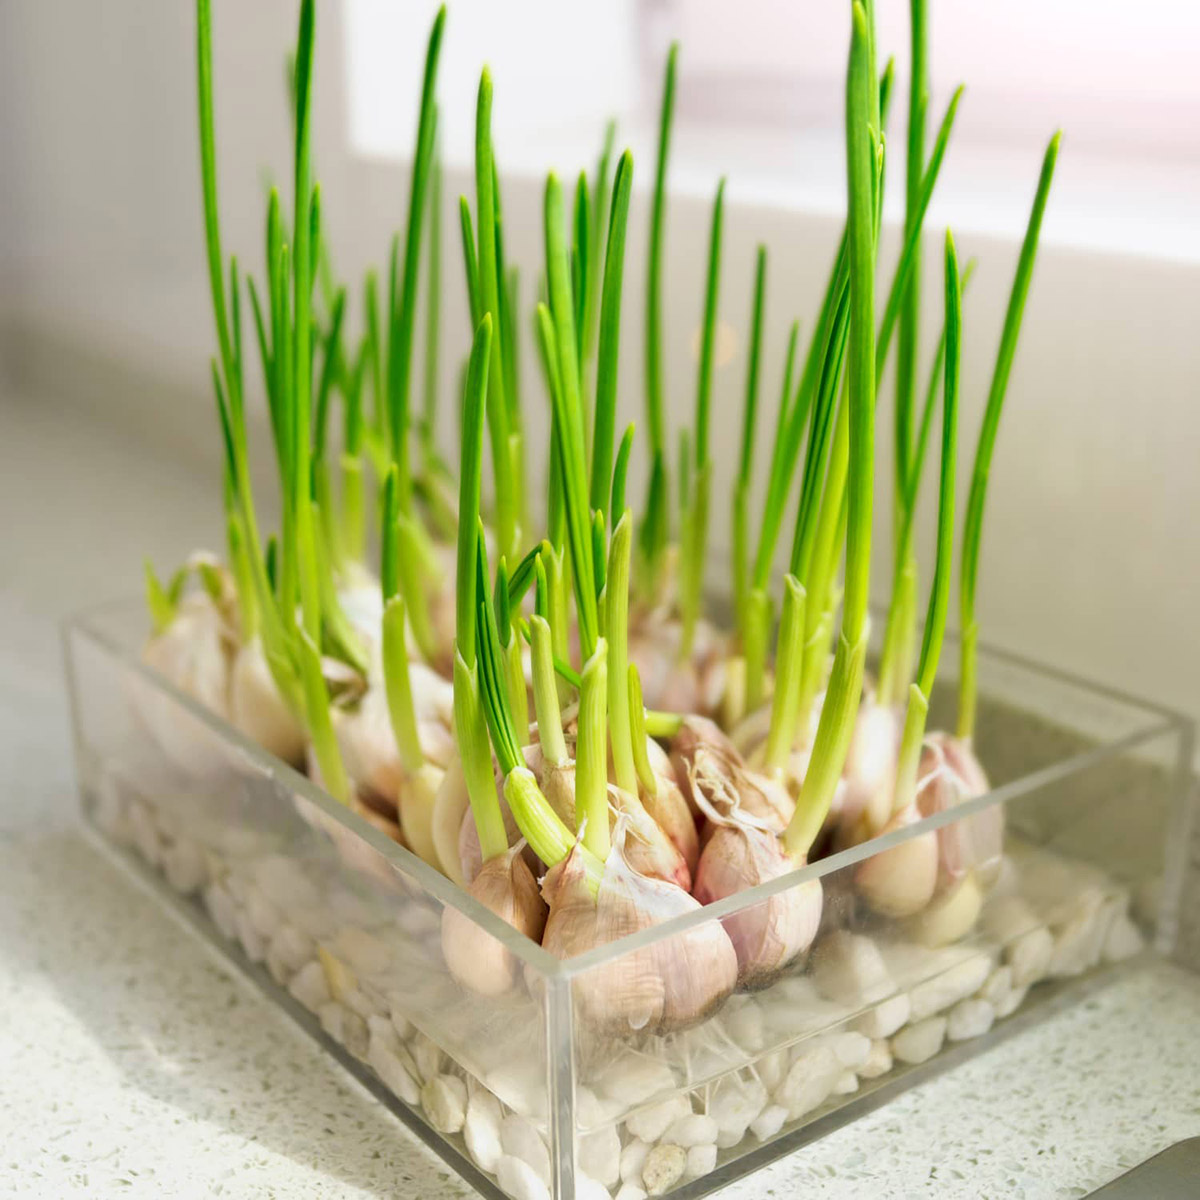 How Long Does It Take Garlic To Germinate